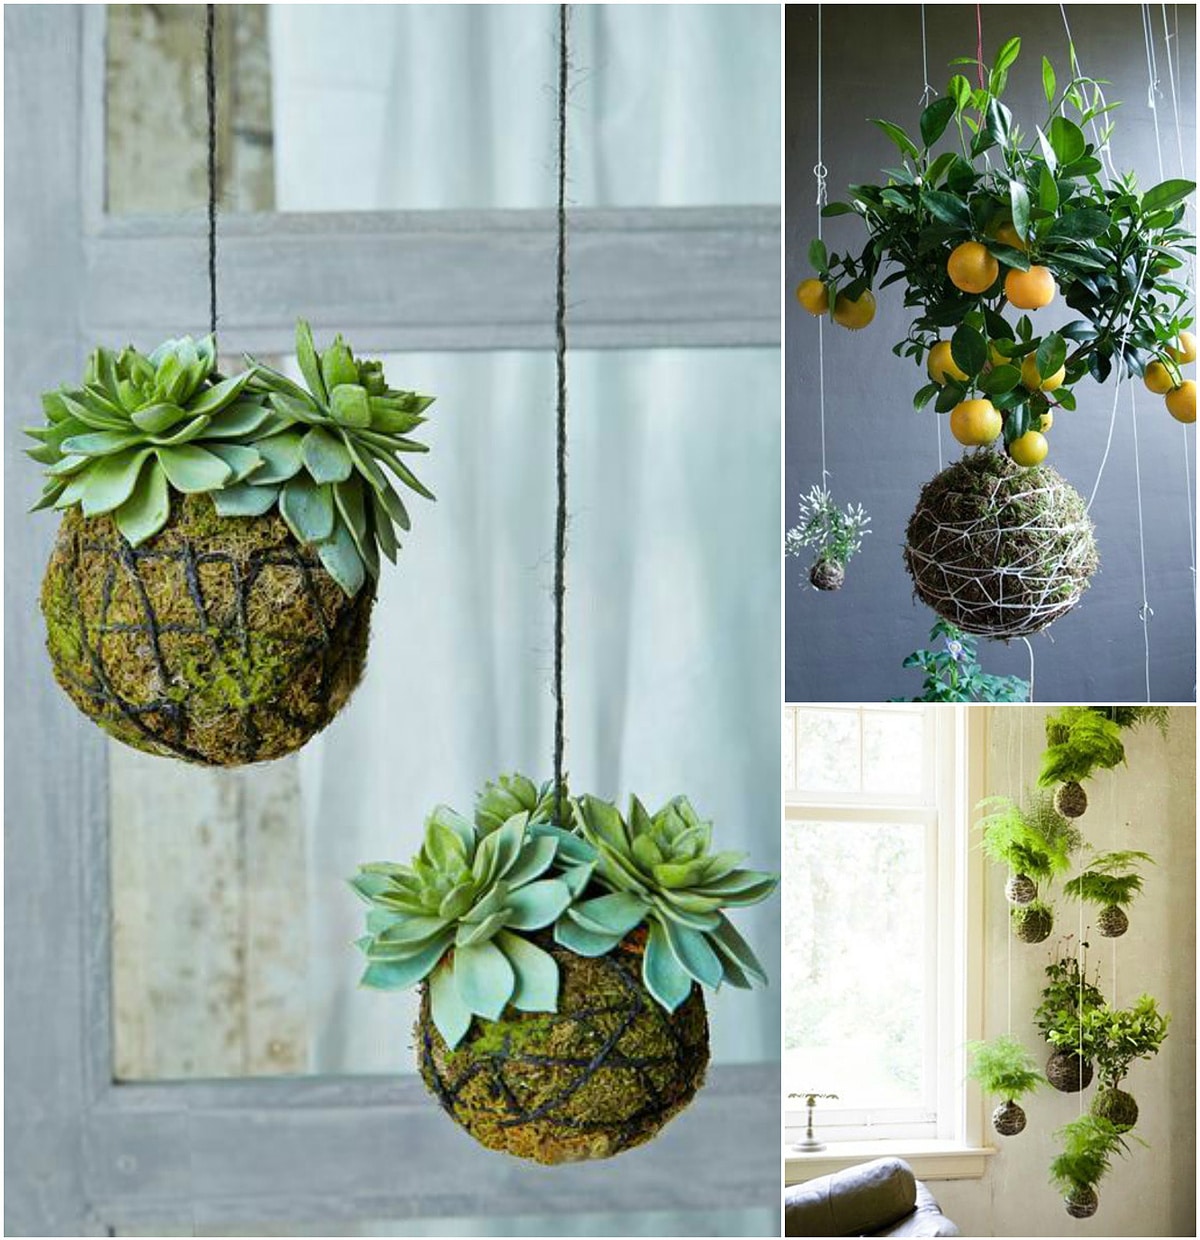 Create Your Very Own Hanging String Garden With This Do-It-Yourself (Diy) Project.